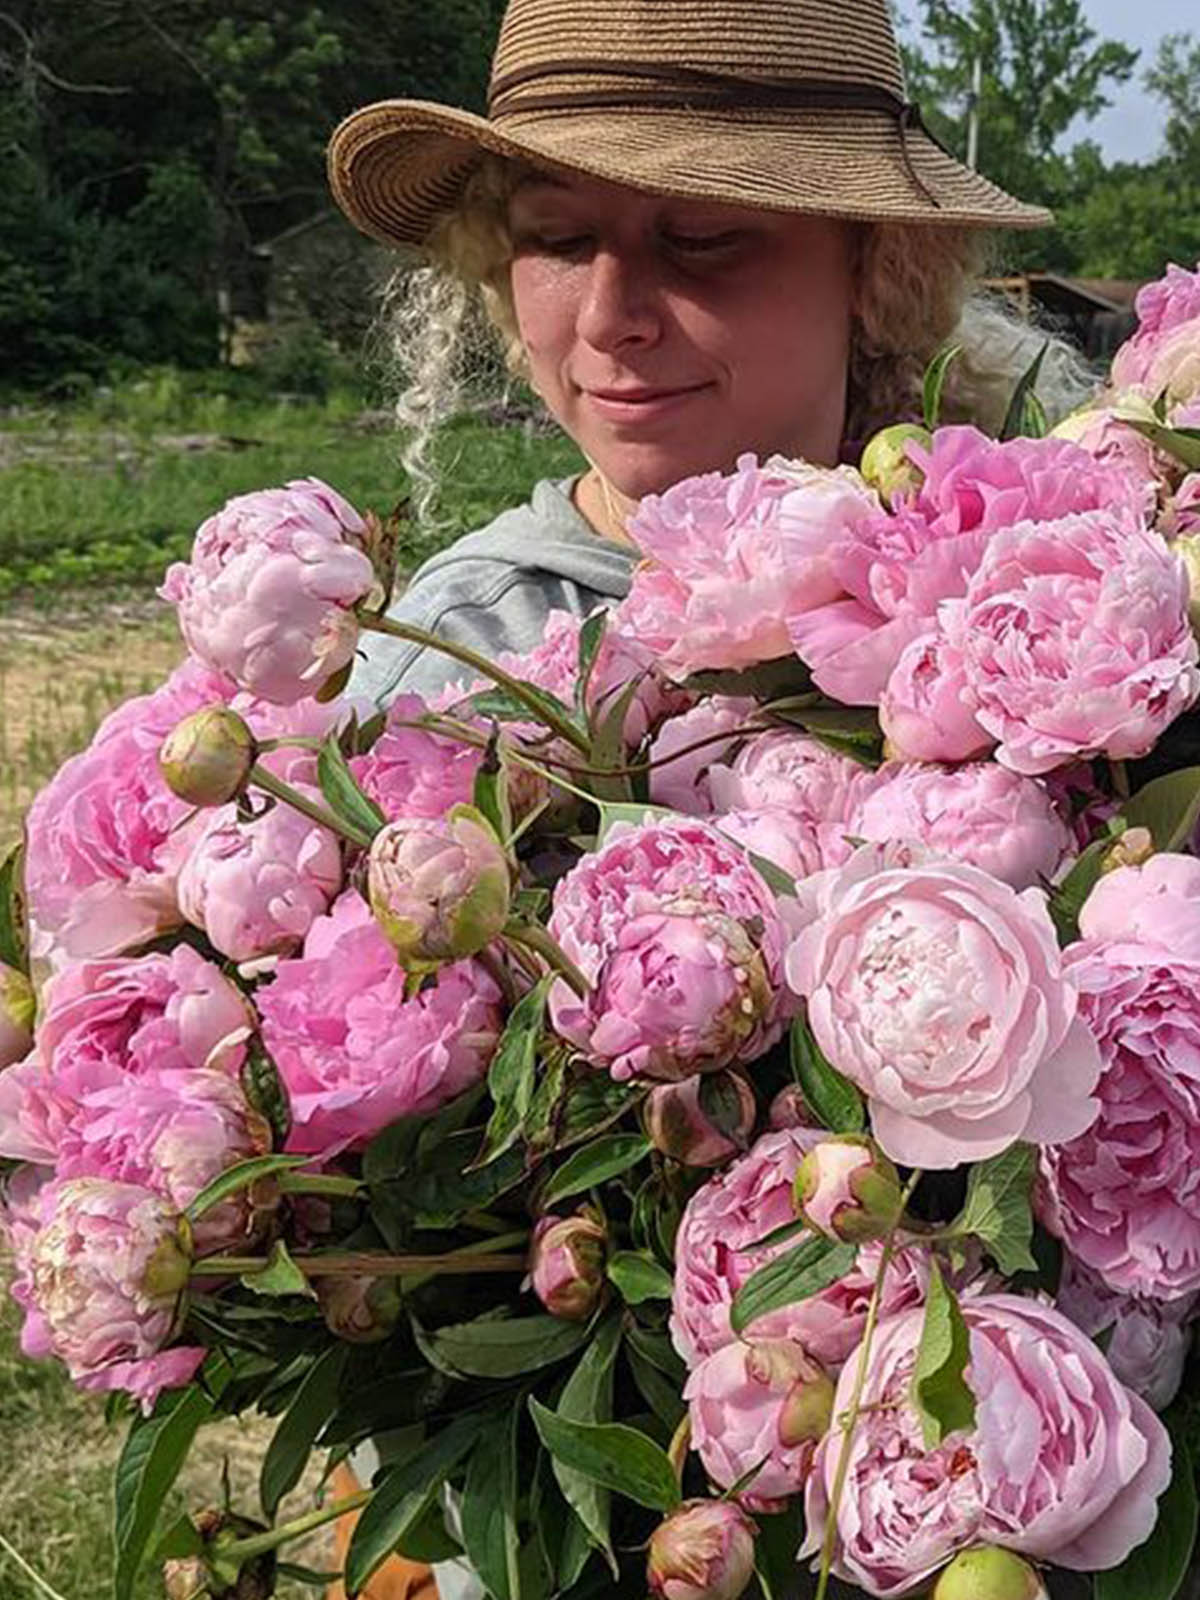 Local Farmer-Florists Are Blooming 12 Stars of the Meadow